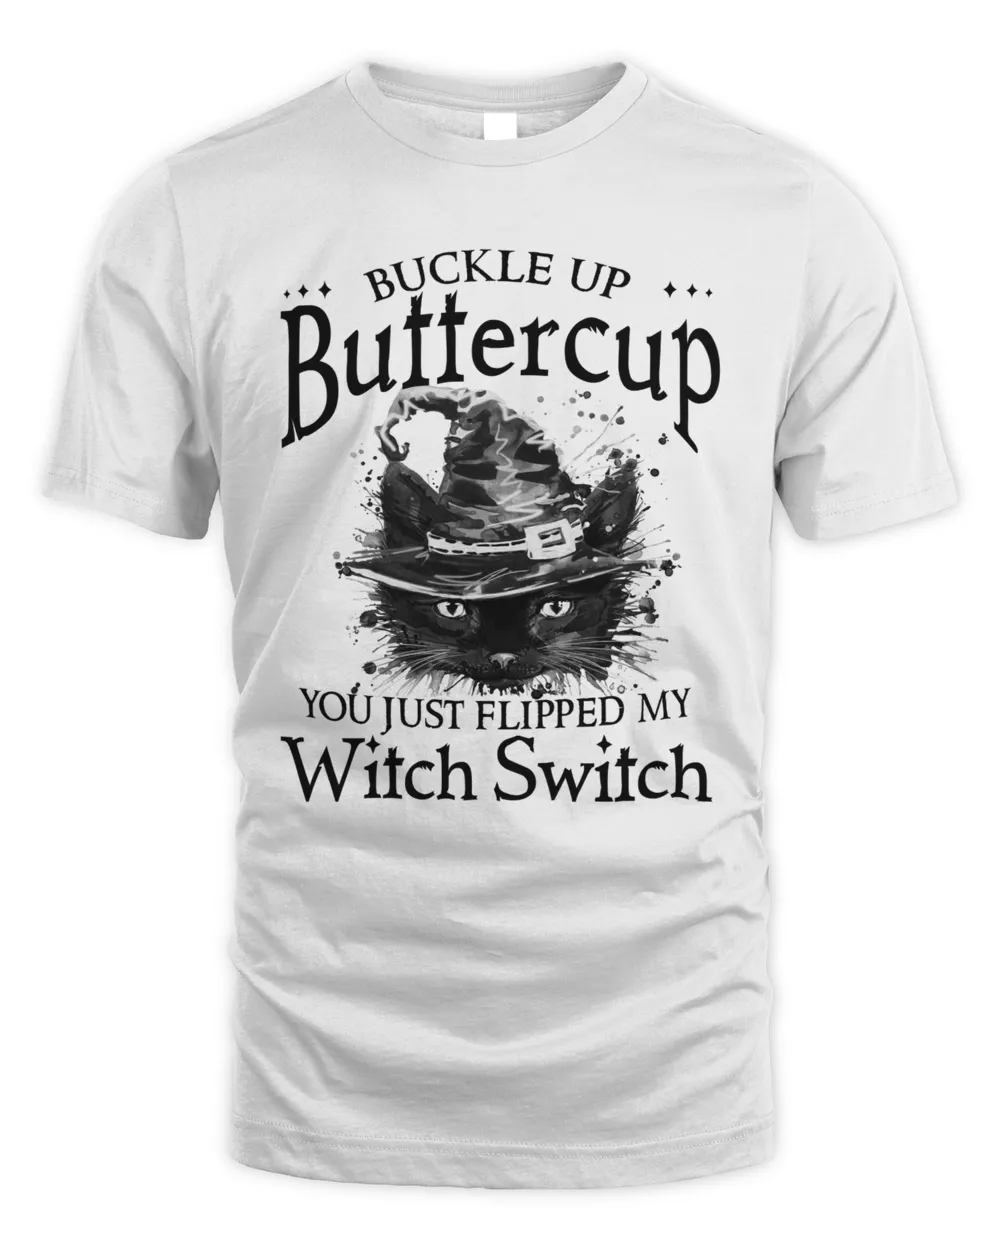 Buckle up buttercup You just flipped my witch switch black cat face